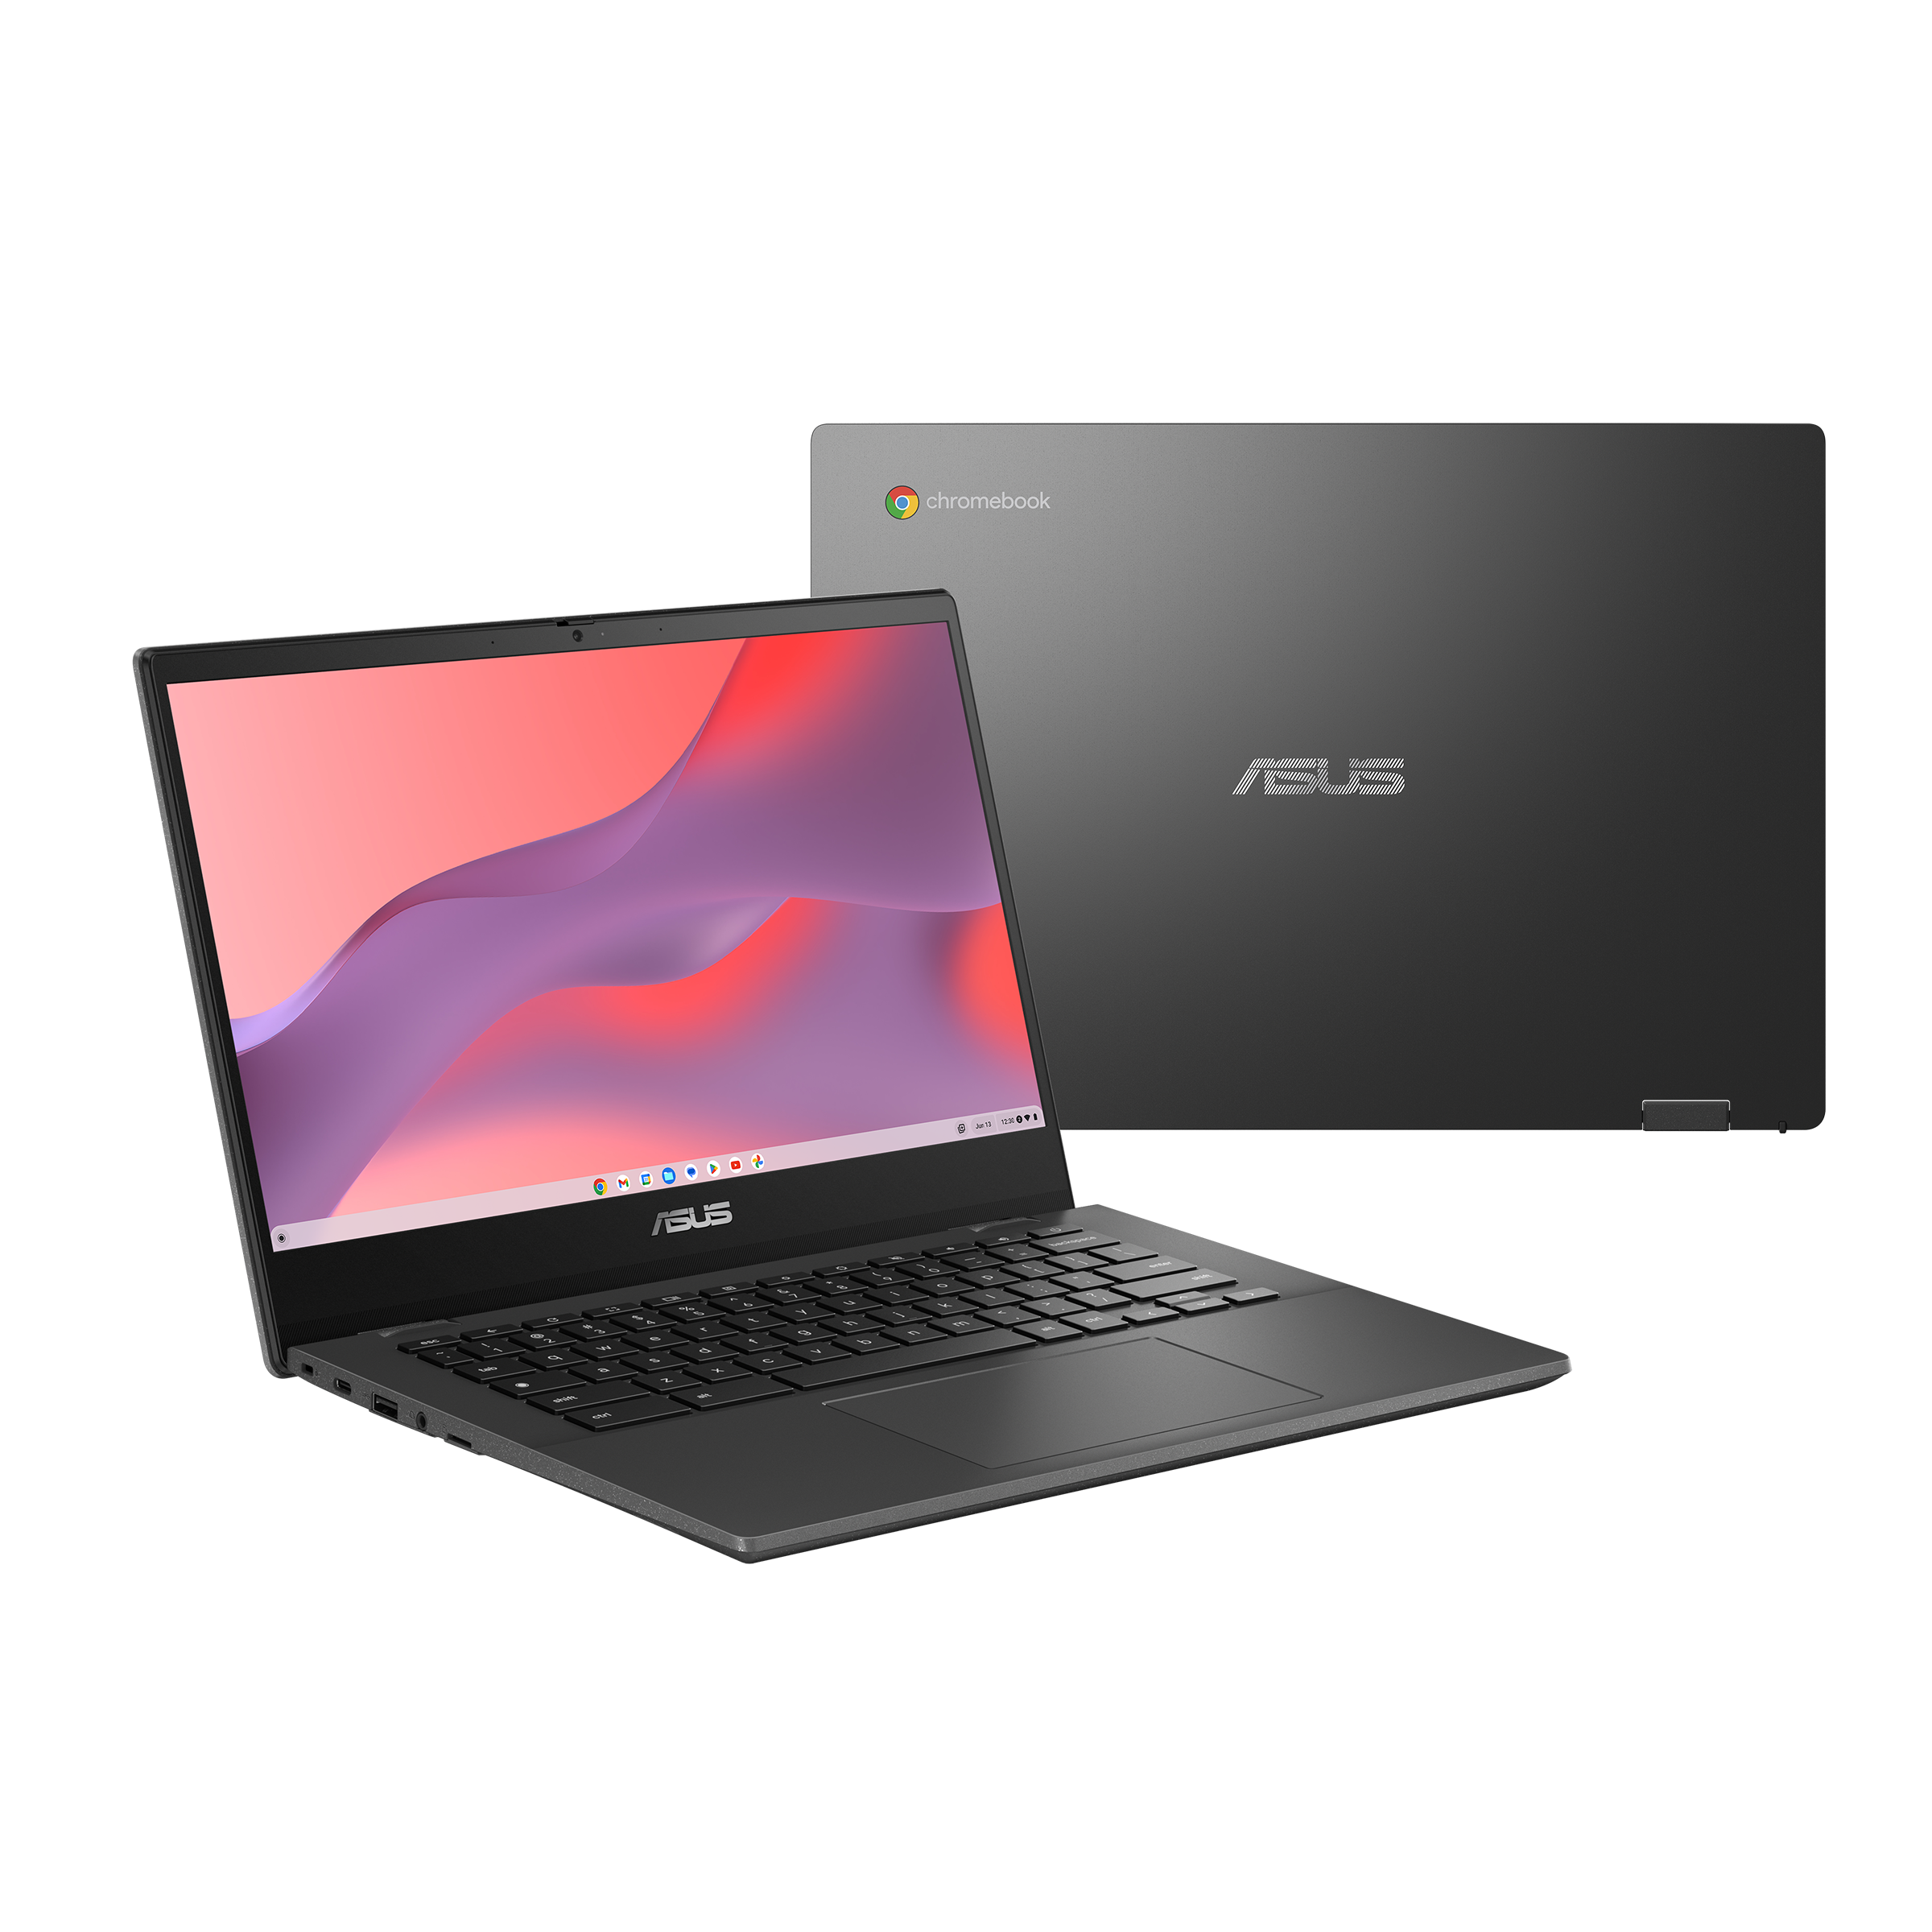 ASUS Chromebook CM14(CM1402C)｜Laptops For Home｜ASUS USA | alle Notebooks